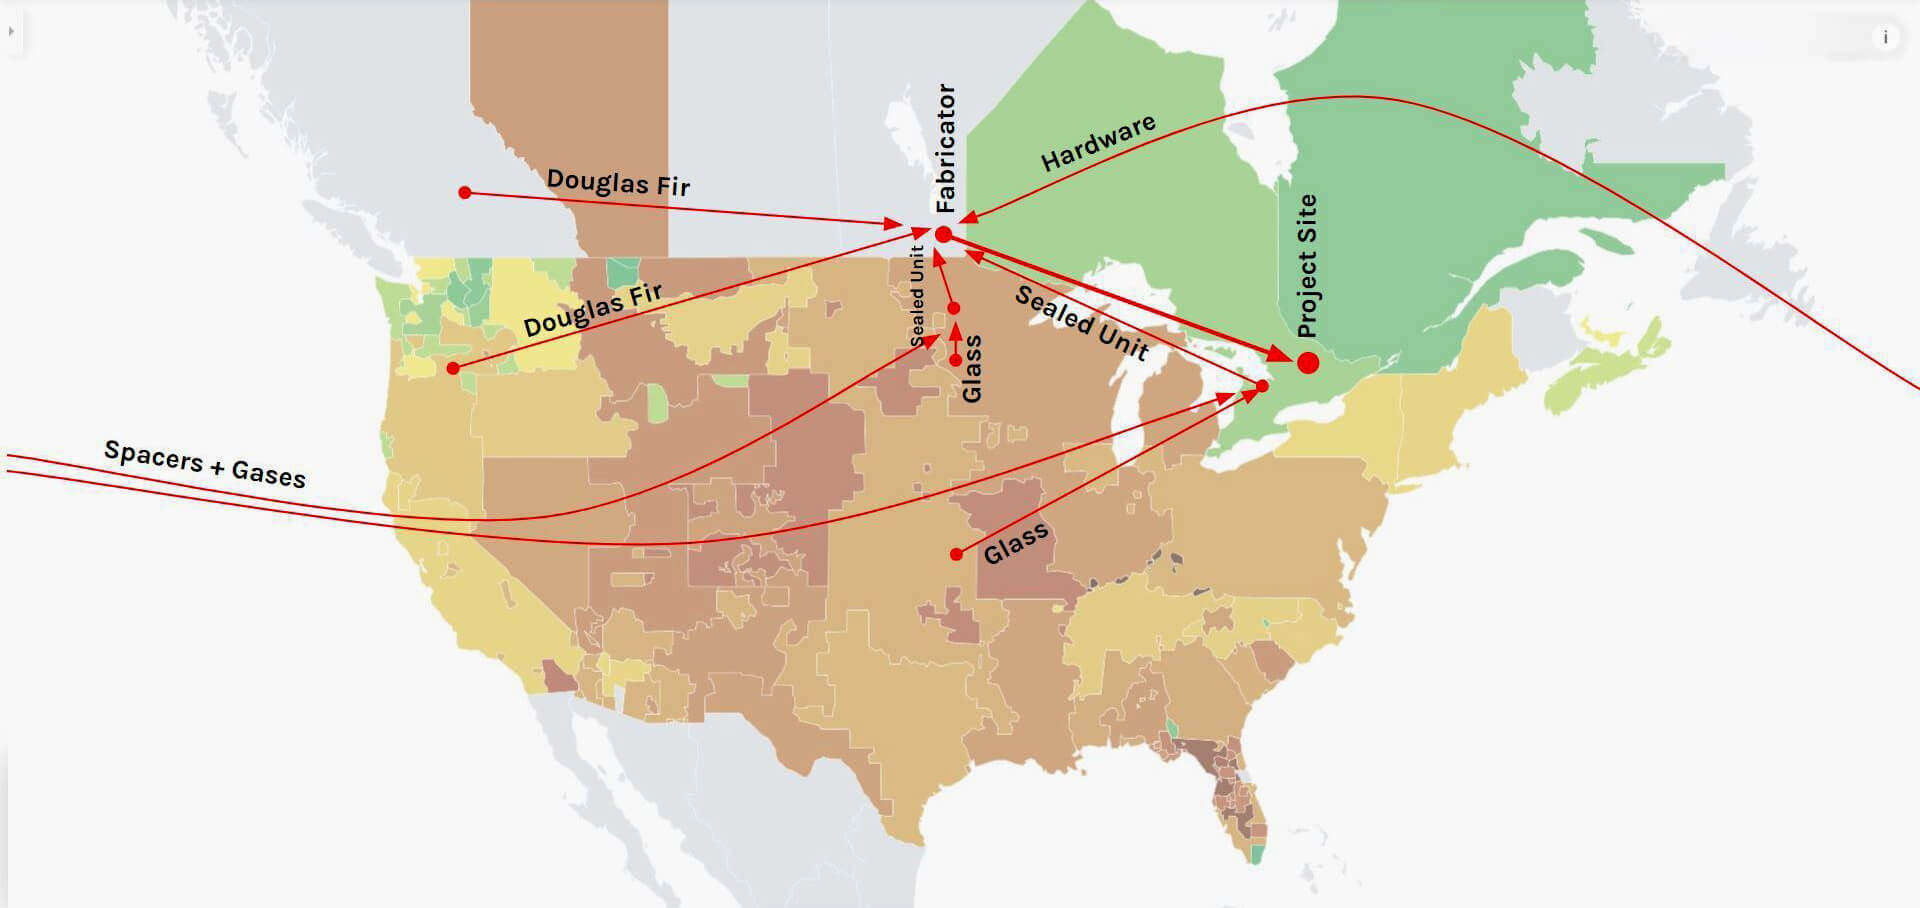 map showing material flows overlayed over energy grid metrics in North America